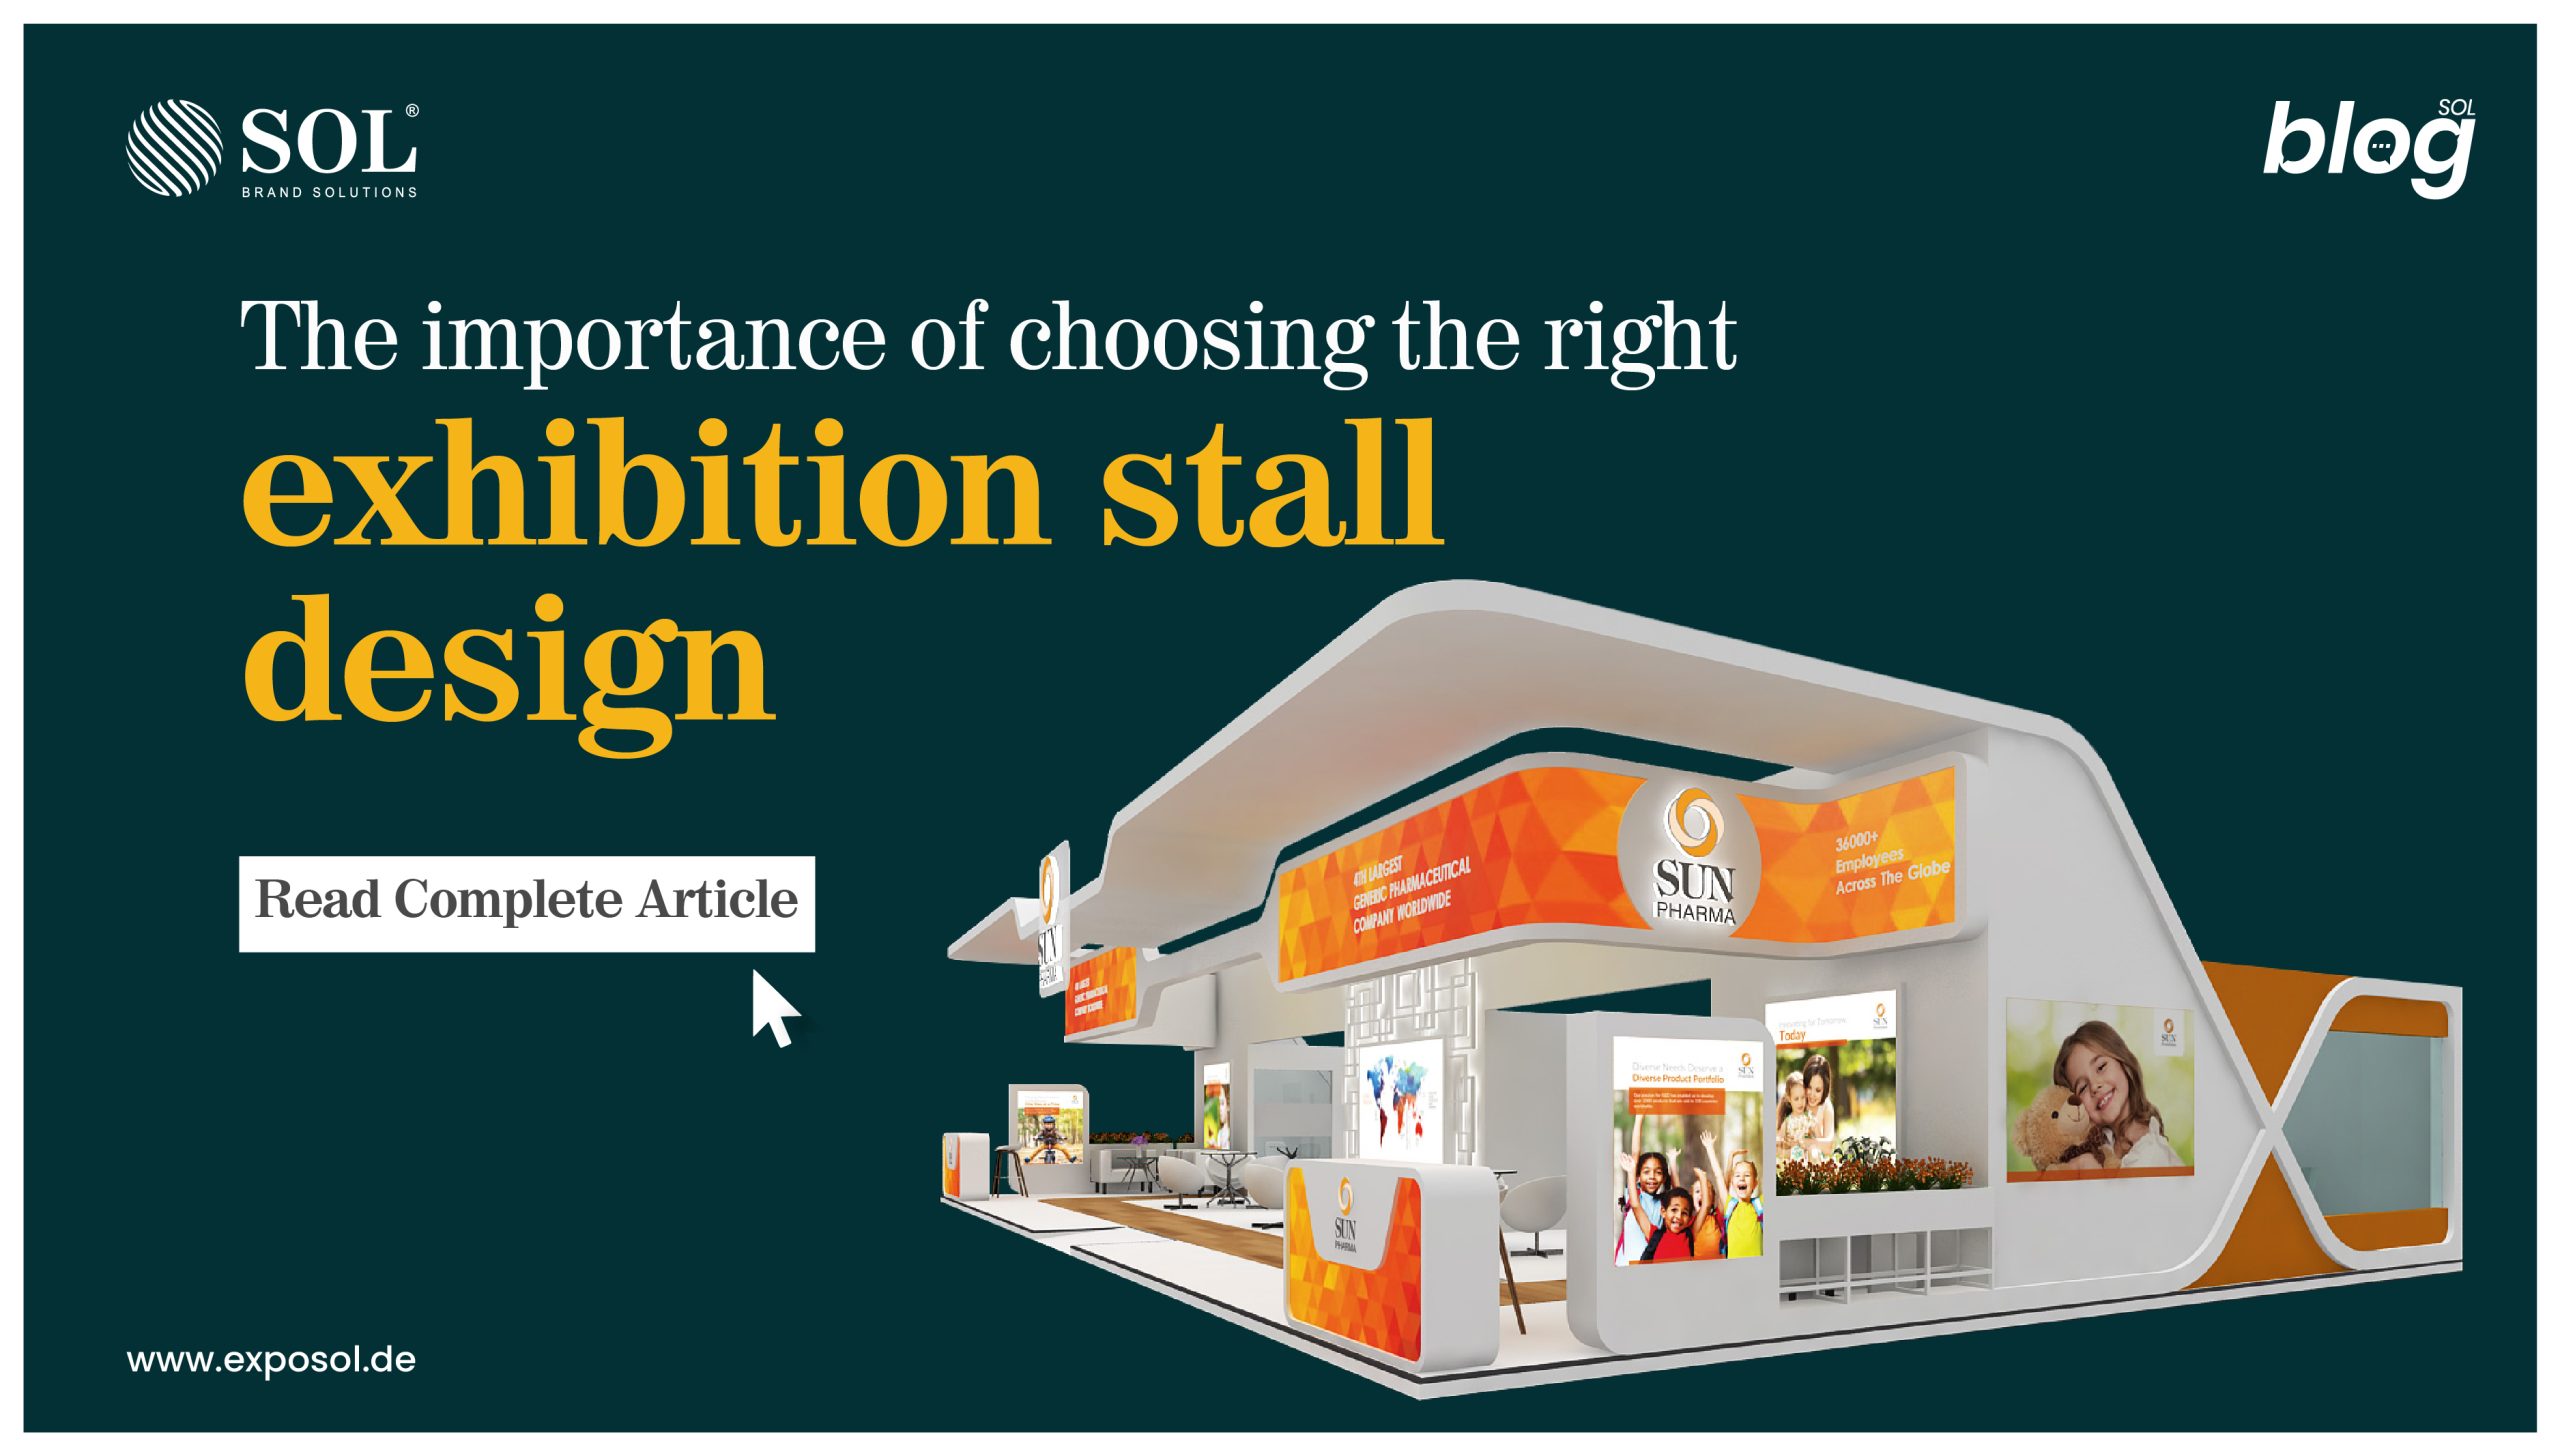 THE BENEFITS OF WORKING WITH A PROFESSIONAL EXHIBITION STAND DESIGNER